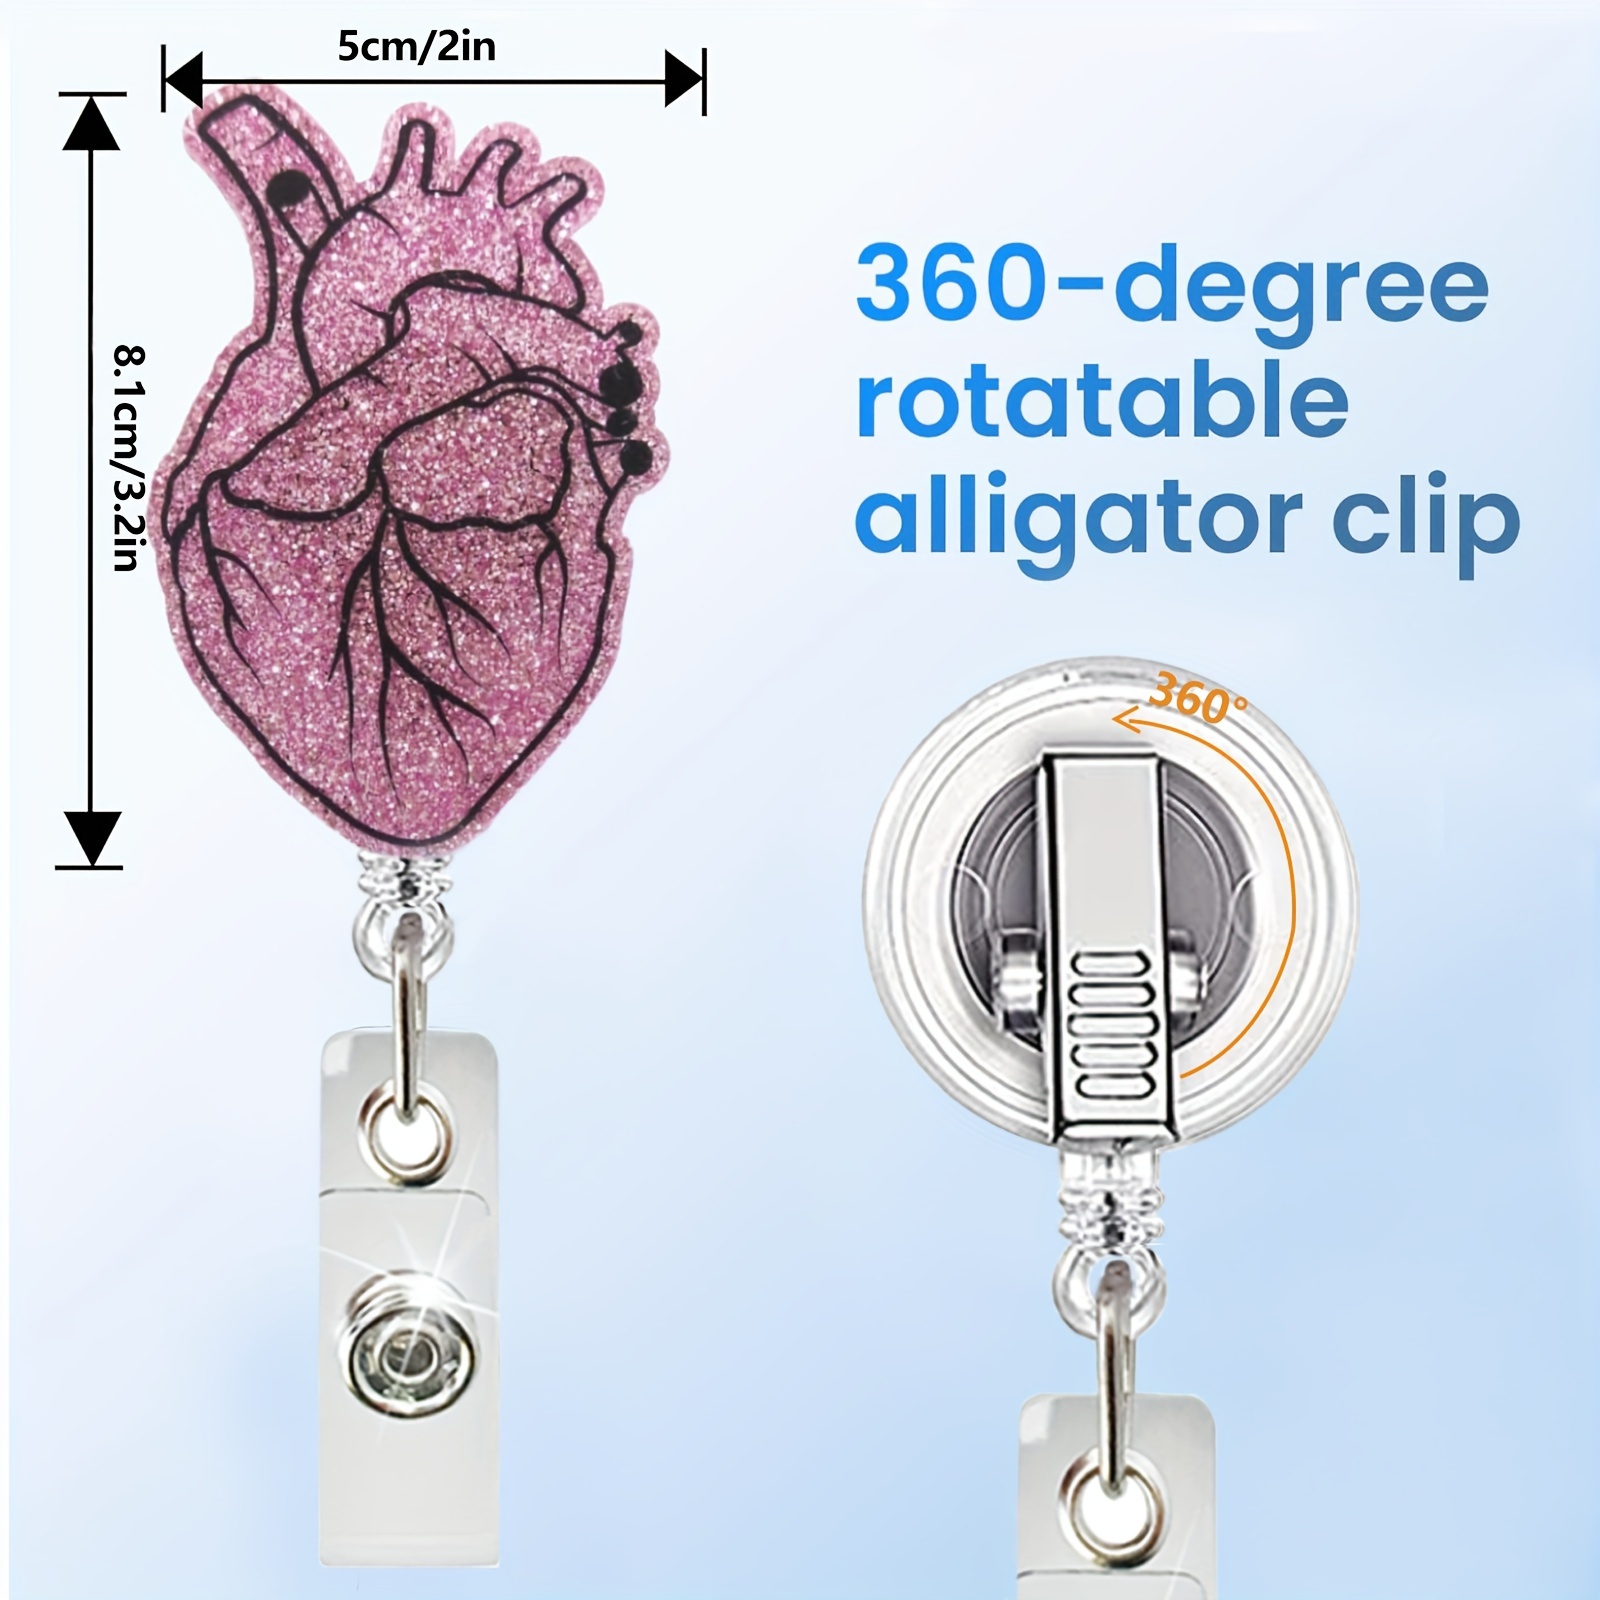 2pcs Badge Reel Holder Retractable With ID Clip For Nurse Nursing Name Tag  Card, Heart Anatomy Nursing Doctor Heart Medical Assistant Work Office Alli